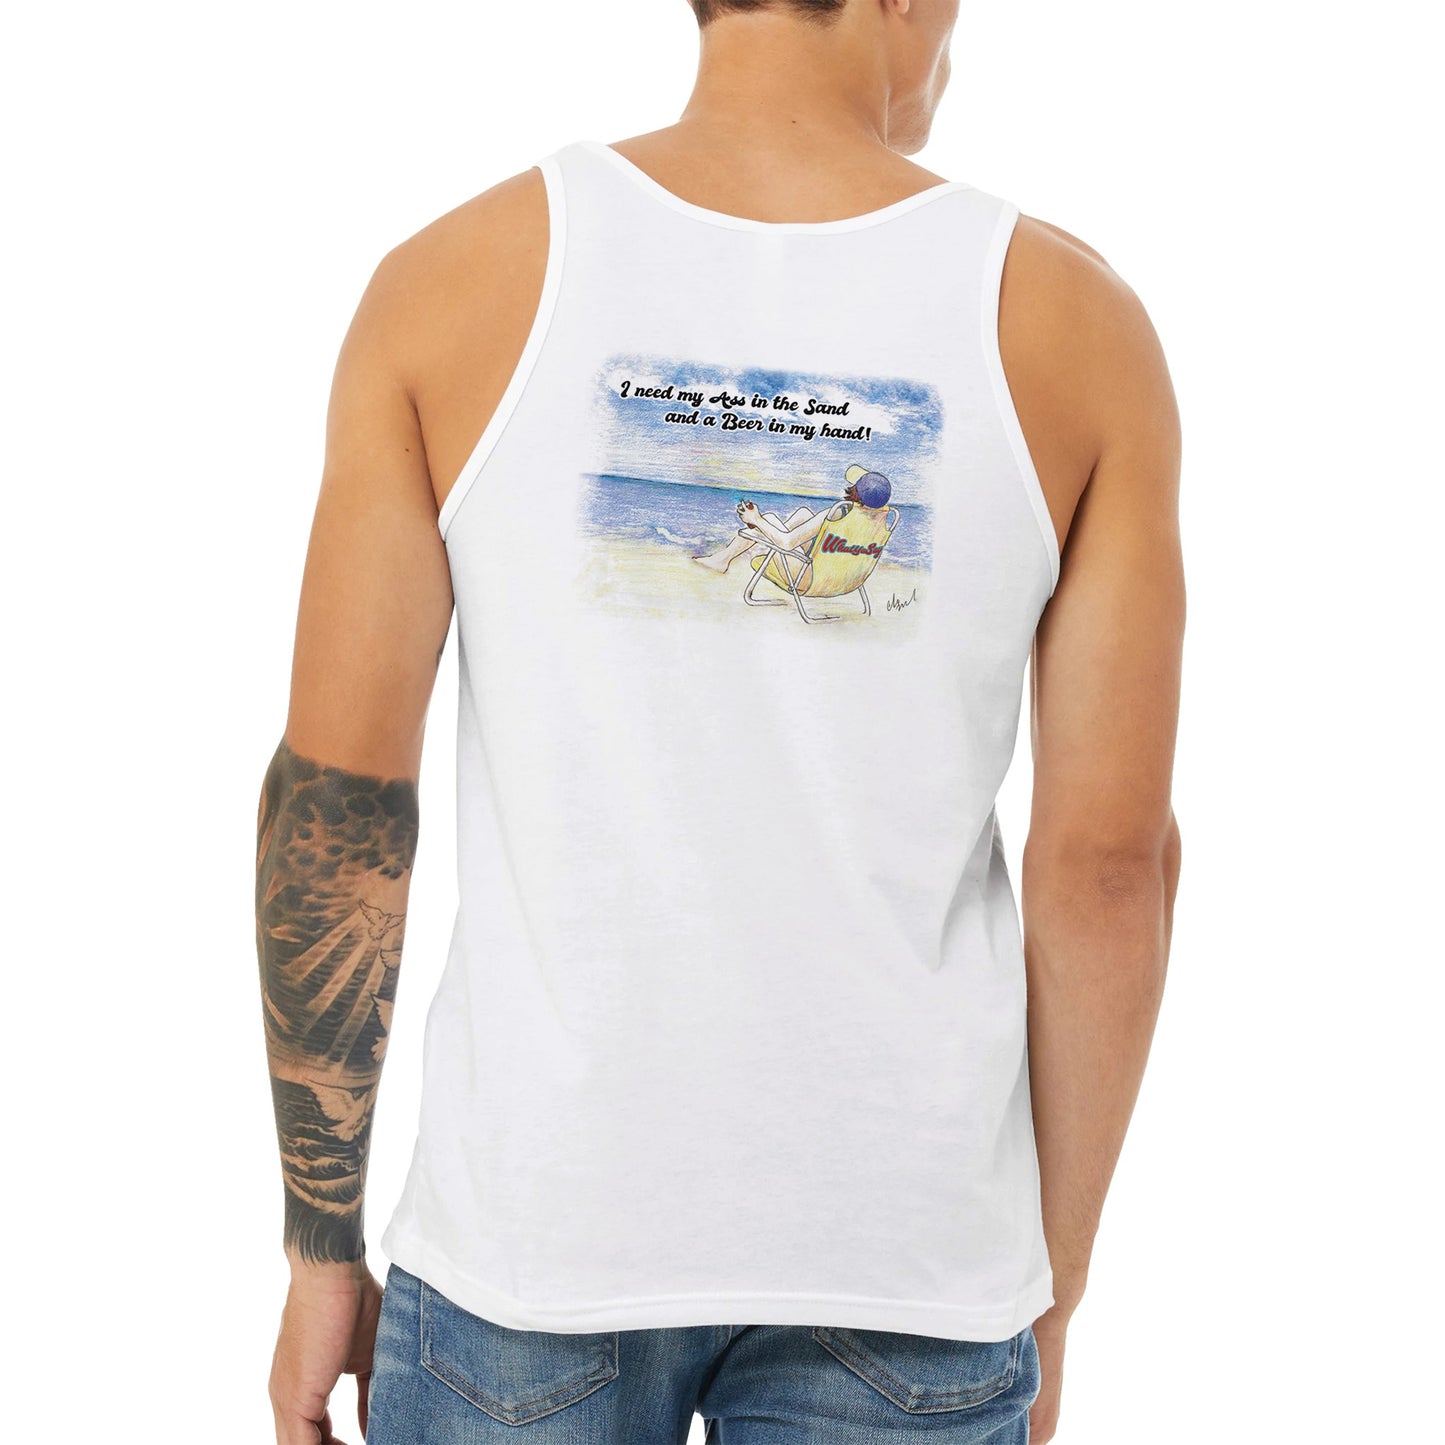 A white Premium Unisex Tank Top with original artwork and motto I need my Ass in the Sand and a Beer in my hand on back with WhatYa Say Logo on front from combed and ring-spun cotton from WhatYa Say Apparel a short brown-haired male model standing back view.